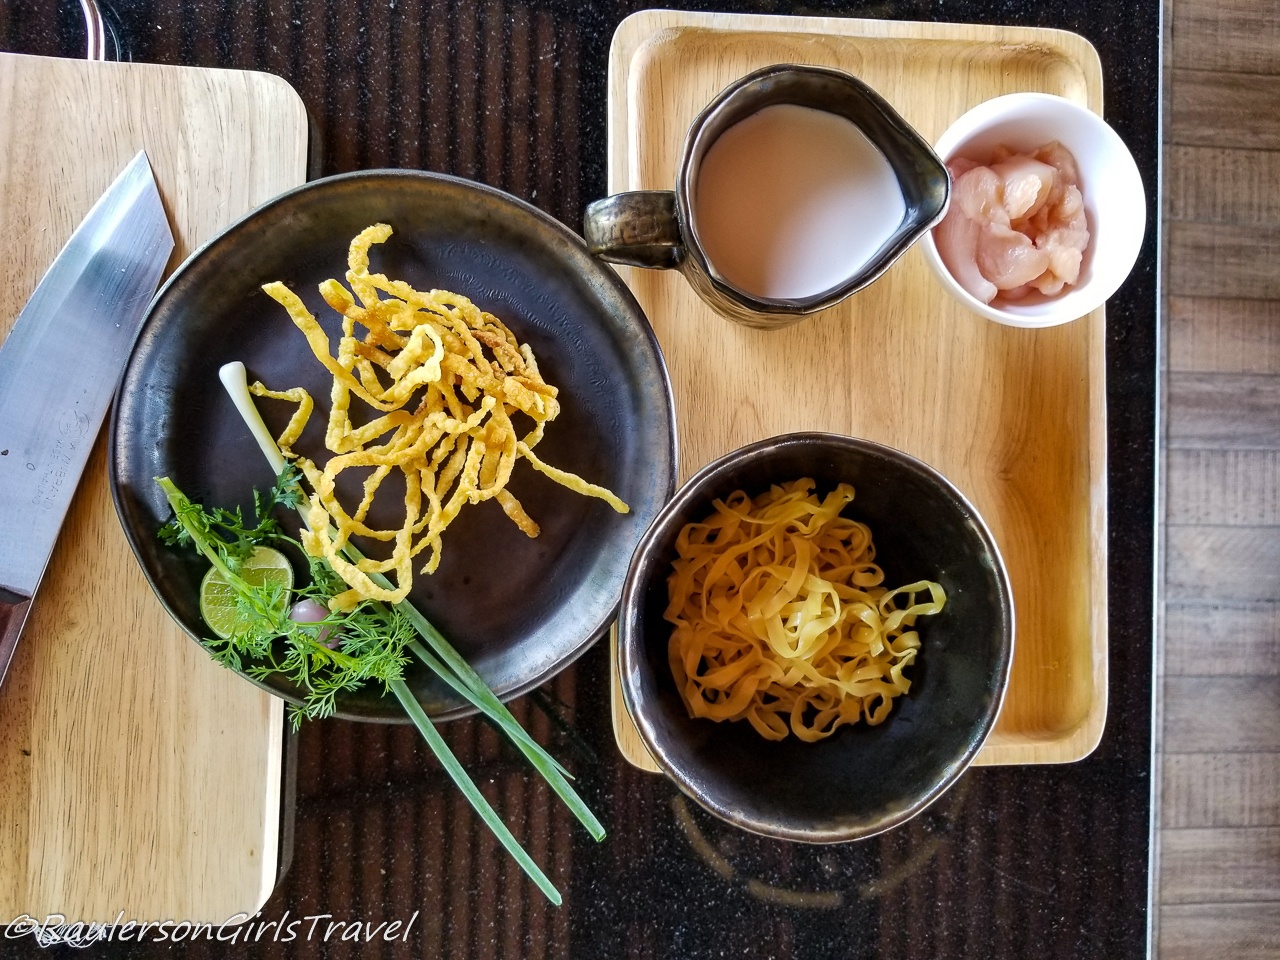 Ingredients for Khao Soi